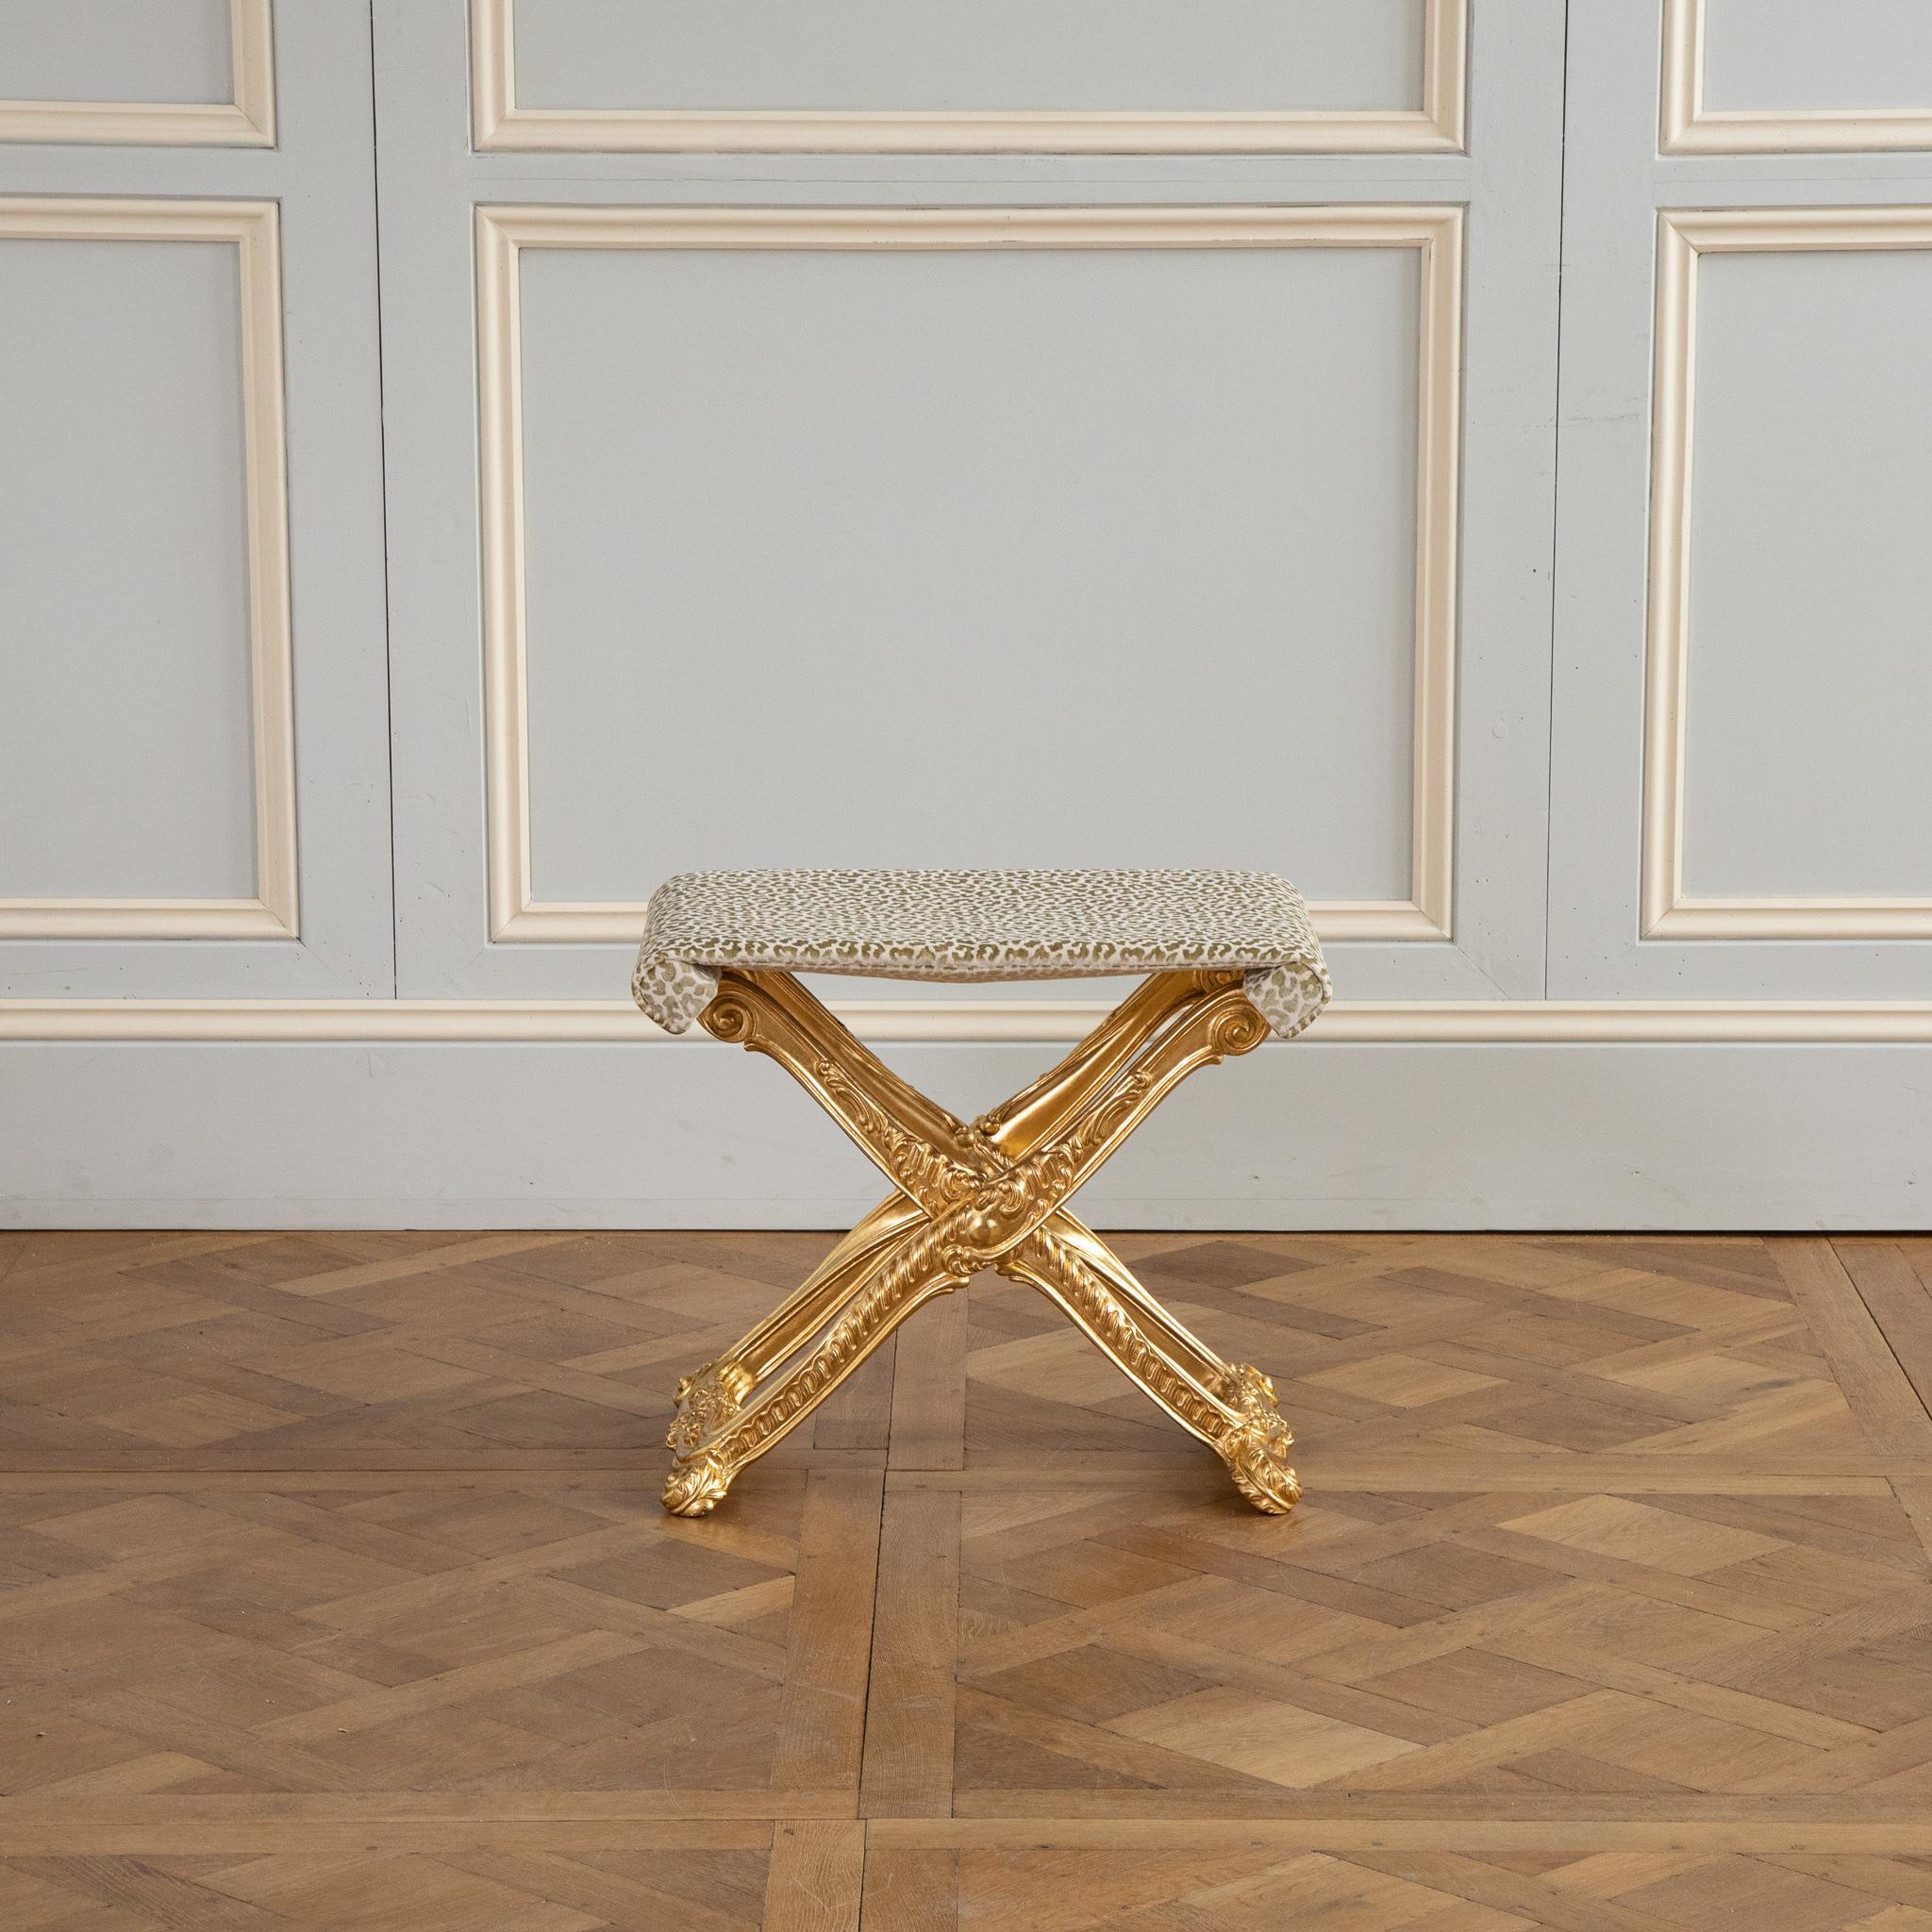  Louis XIV Style Giltwood folding stool made by La Maison London For Sale 4